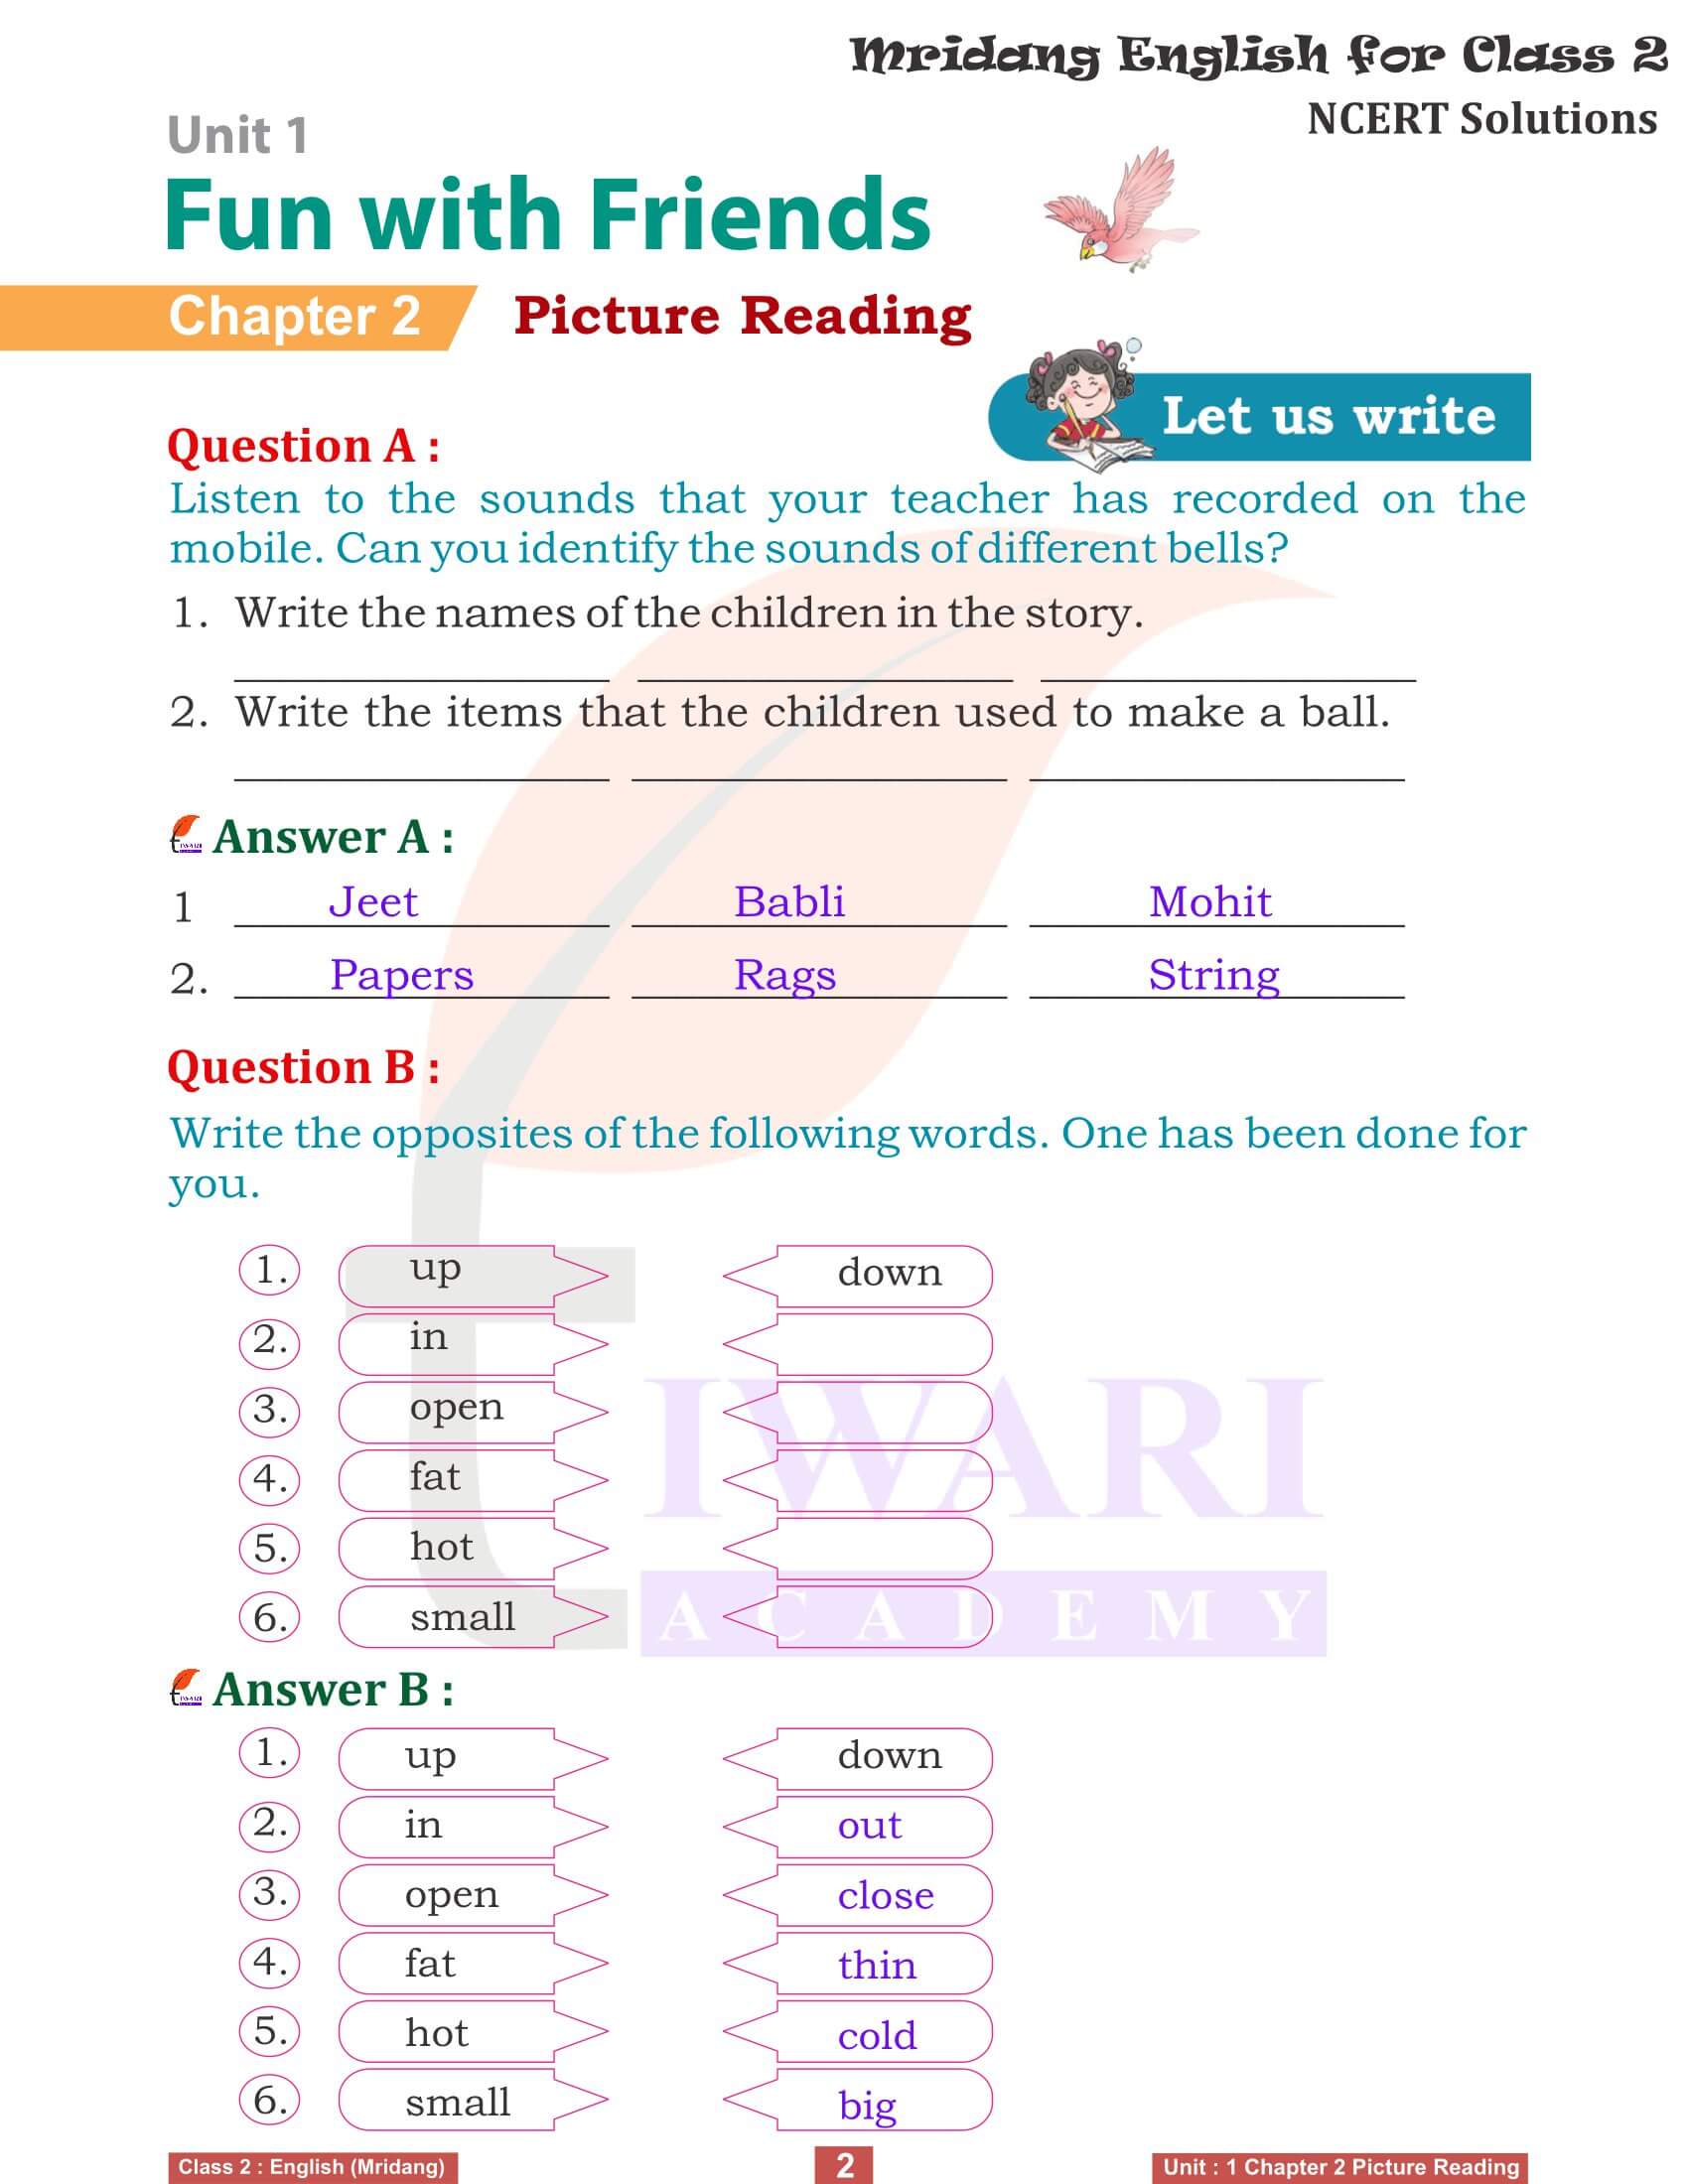 Class 2 English Mridang Unit 1 Fun with Friends Chapter 2 Picture Reading